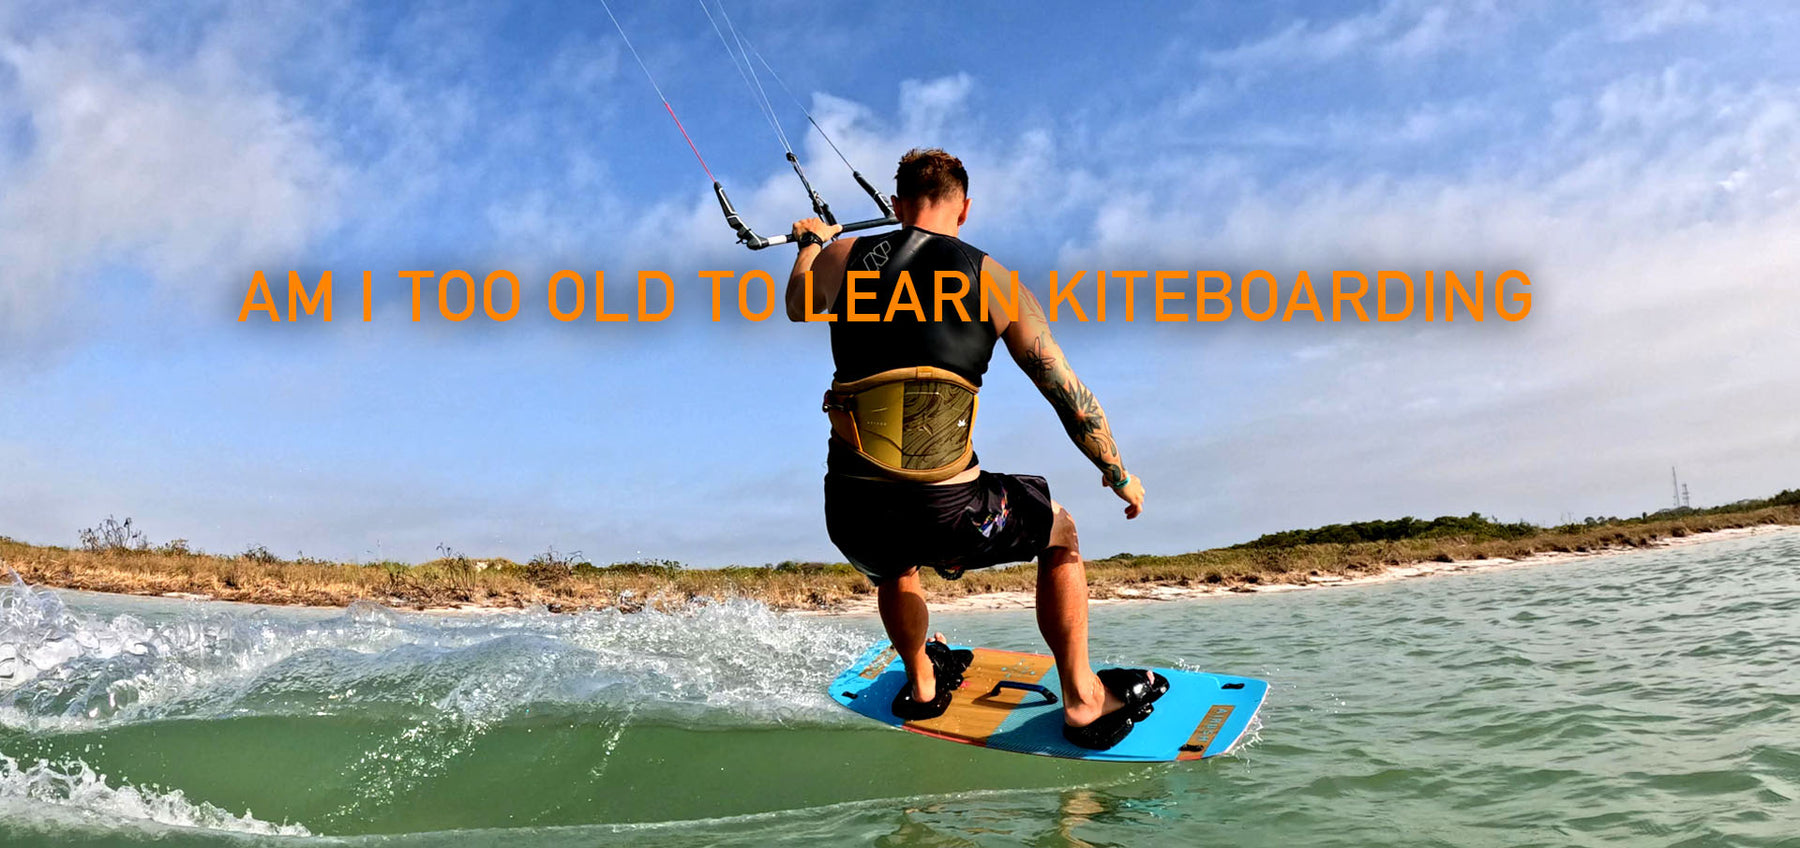 Am I too old to learn kitesurfing? Can a 60-year-old learn to kite surf? Why everyone in Central Florida should consider kitesurfing lessons.